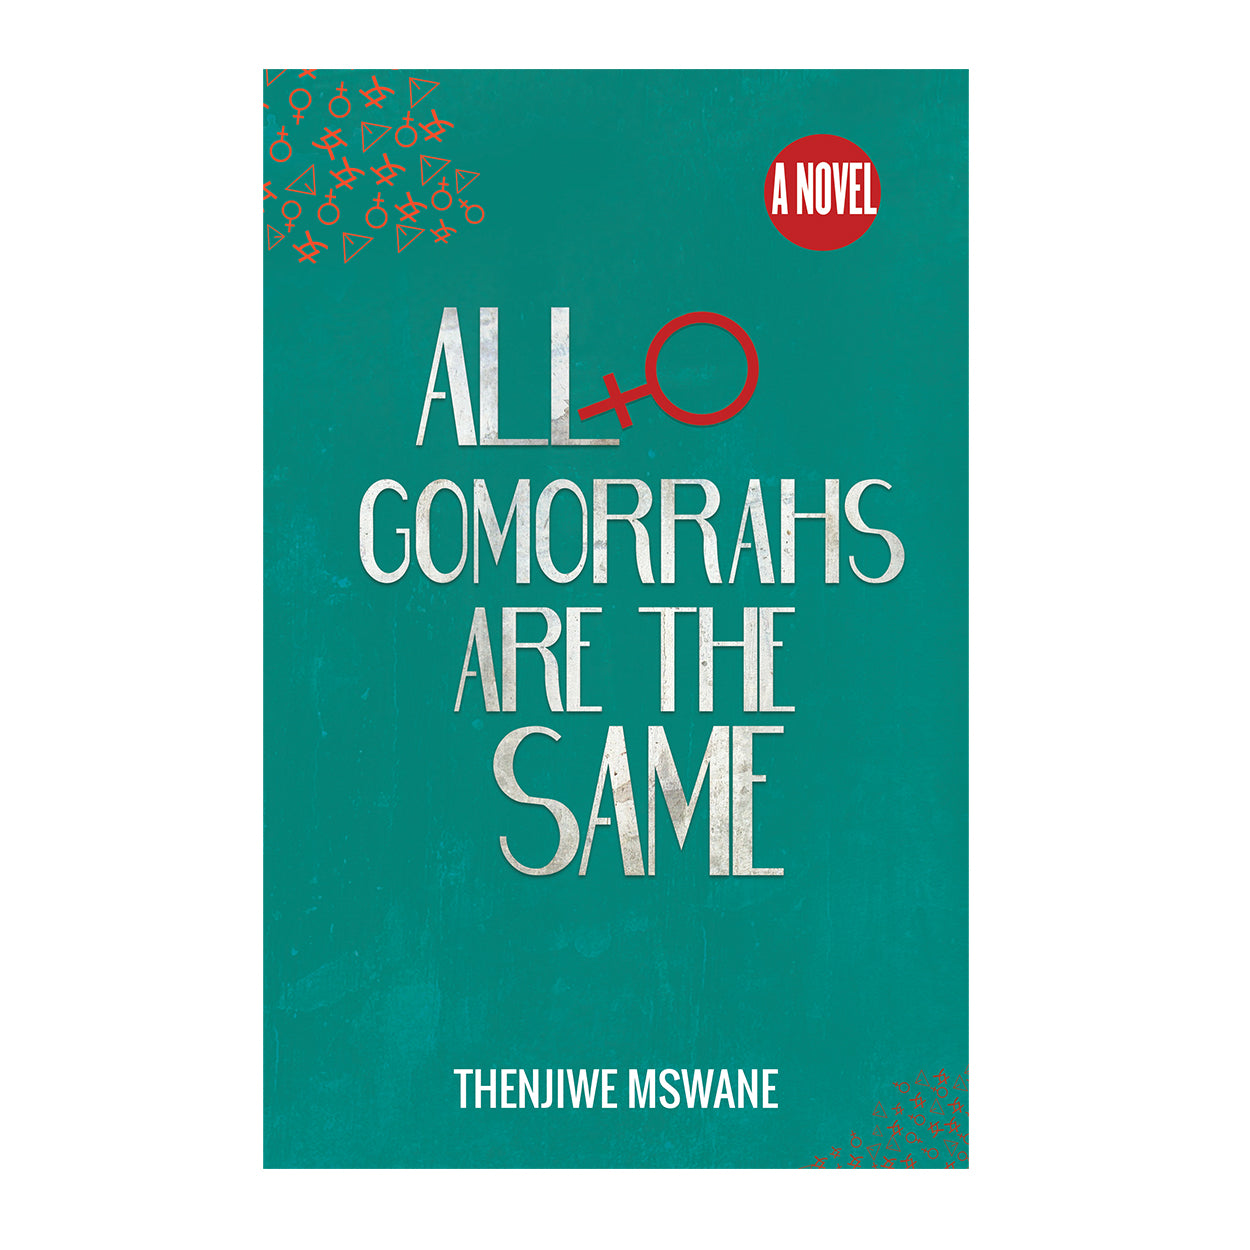 All Gomorrahs Are The Same, by Thenjiwe Mswane